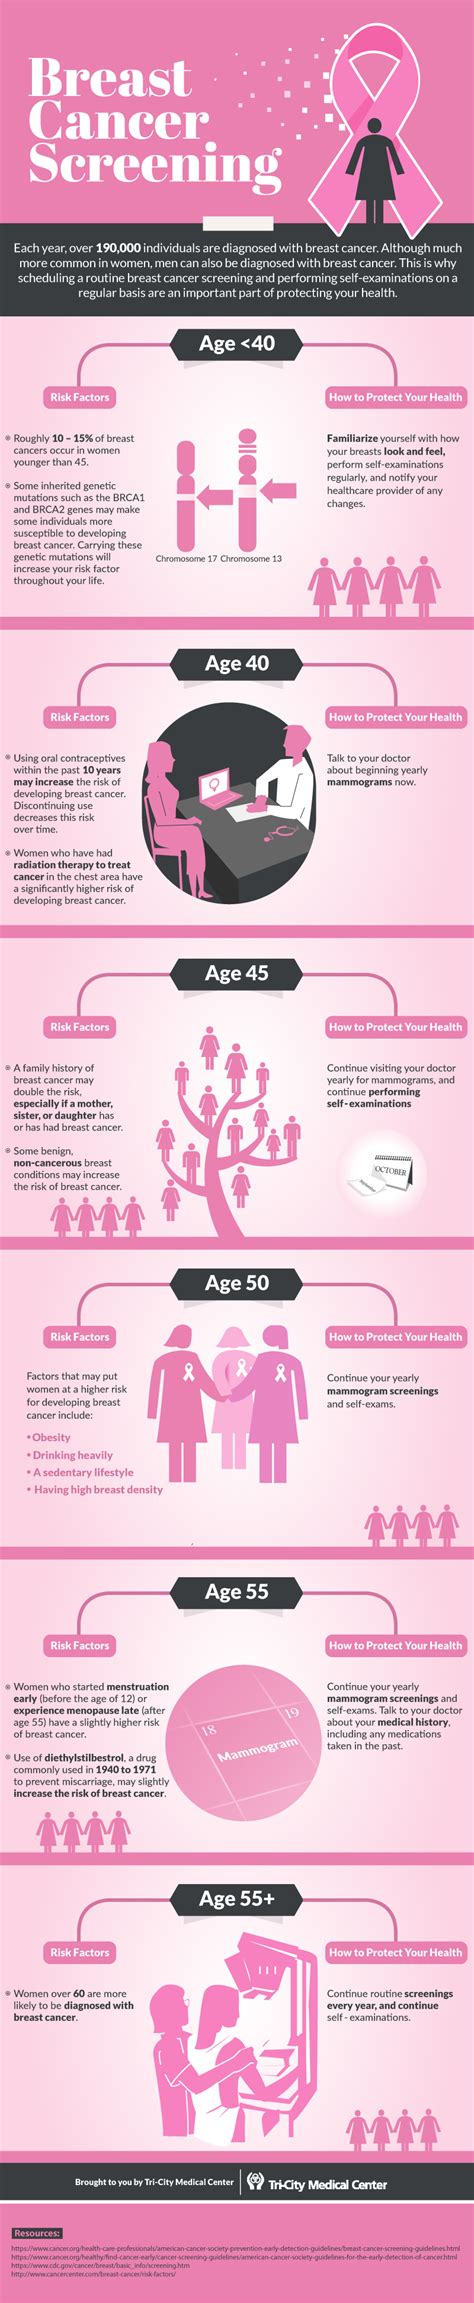 Breast Cancer Screening Infographic Tri City Medical Center